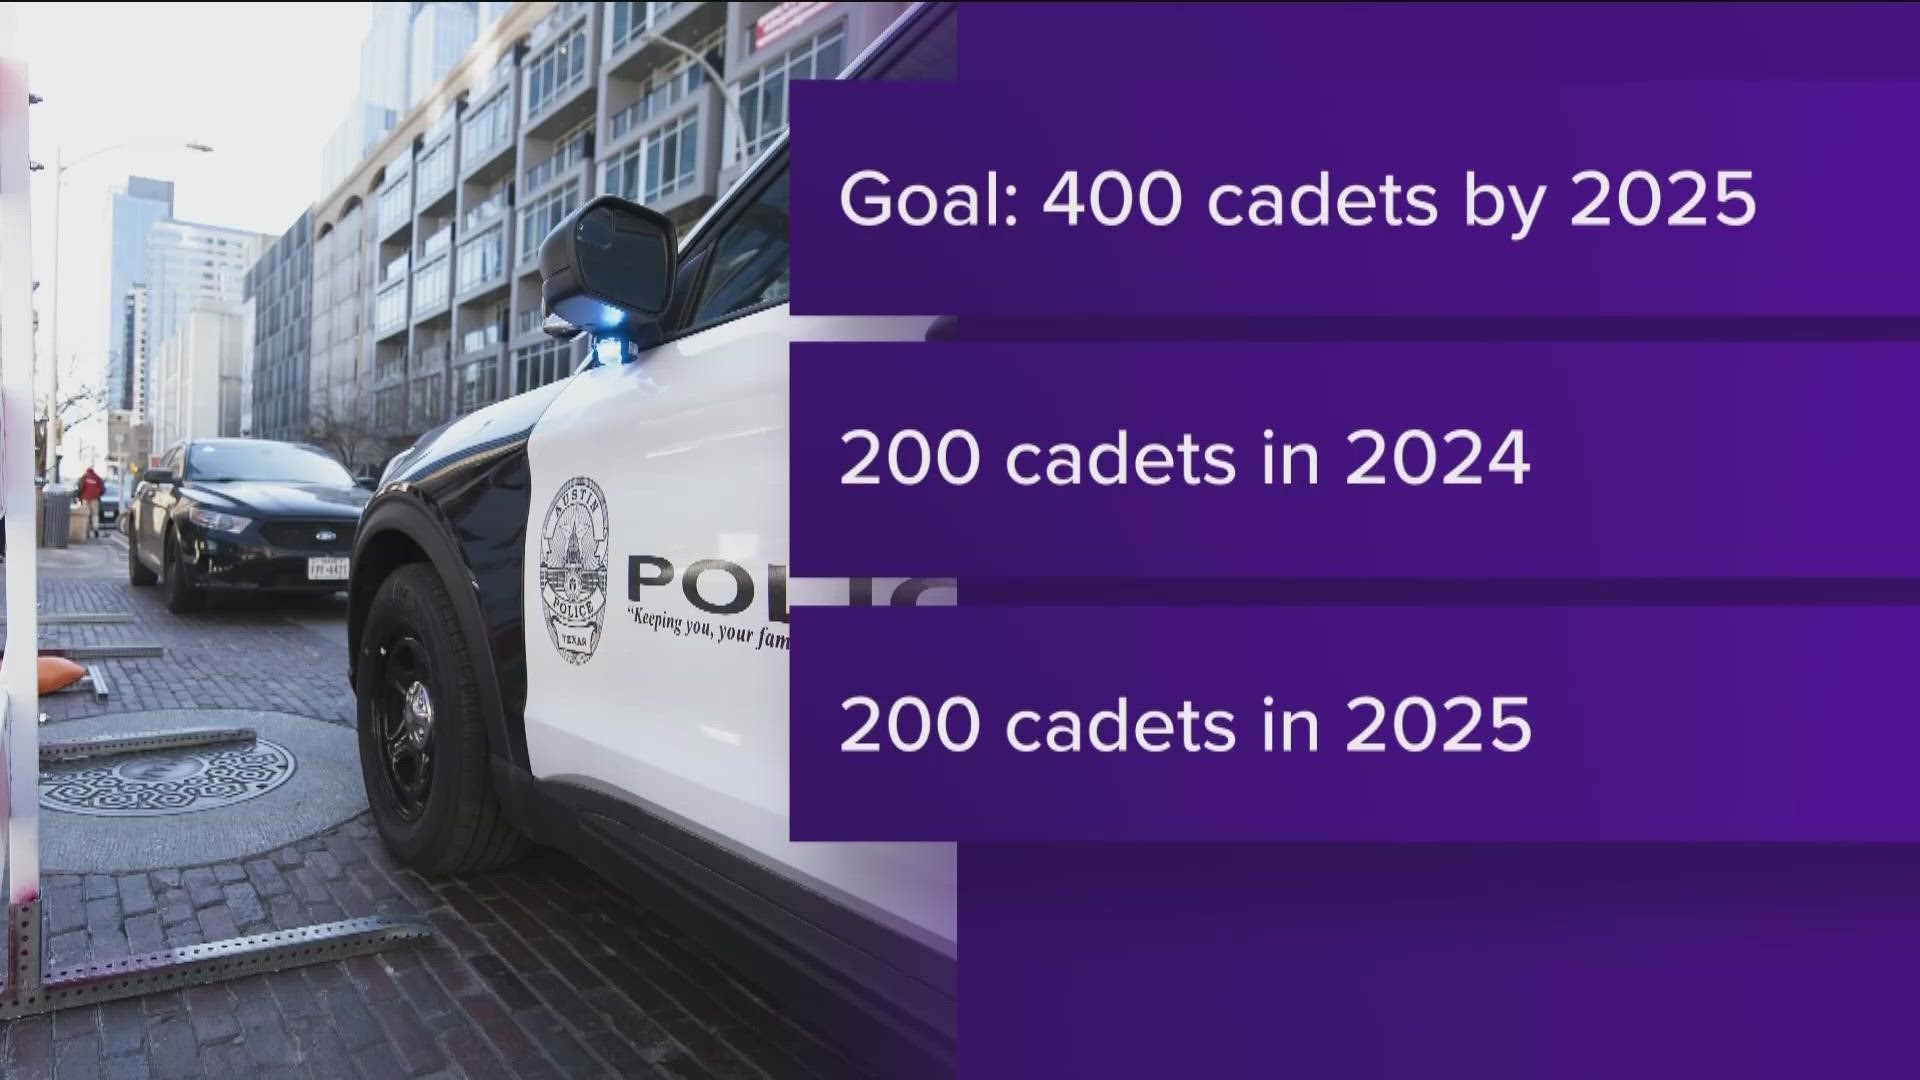 Included in the agreement are hiring 400 cadets by 2025. The agreement took almost a year to create and will still need approval by City Council.